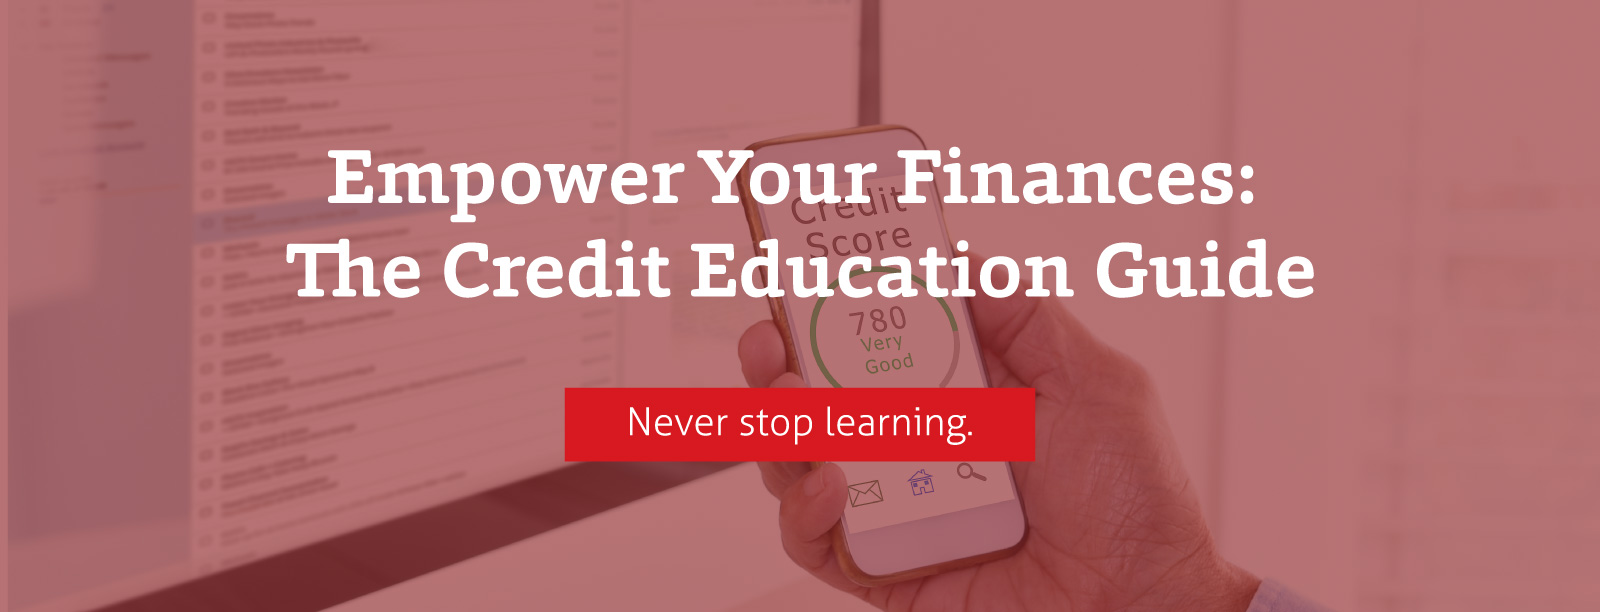 Empower Your Finances: The Credit Education Guide